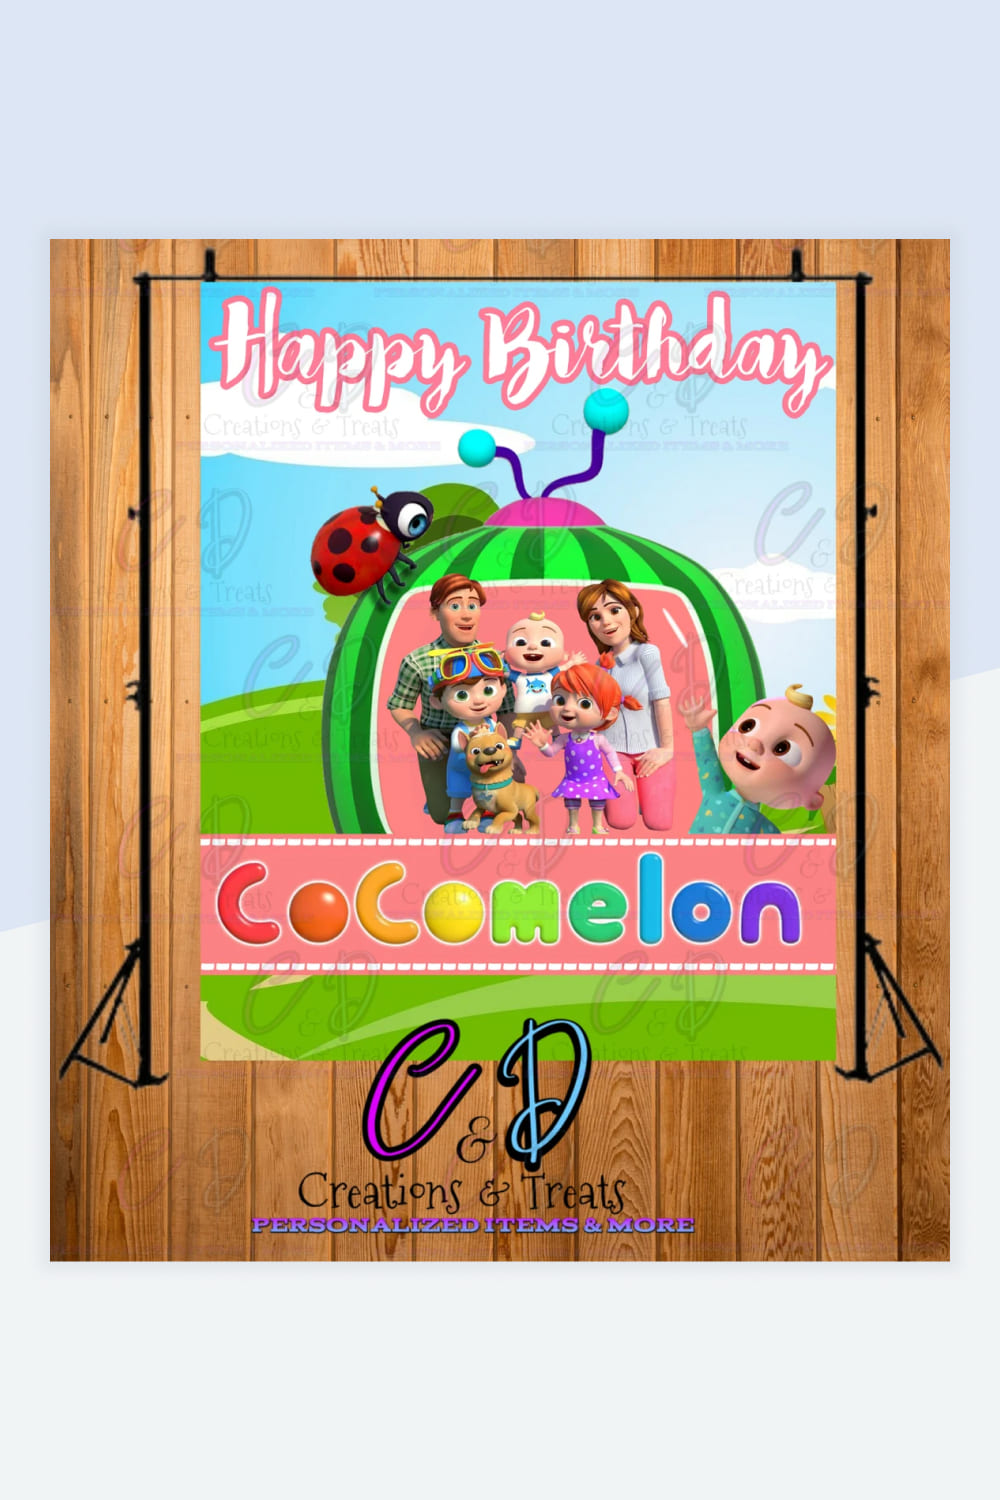 Birthday card with Cocomelon cartoon characters.